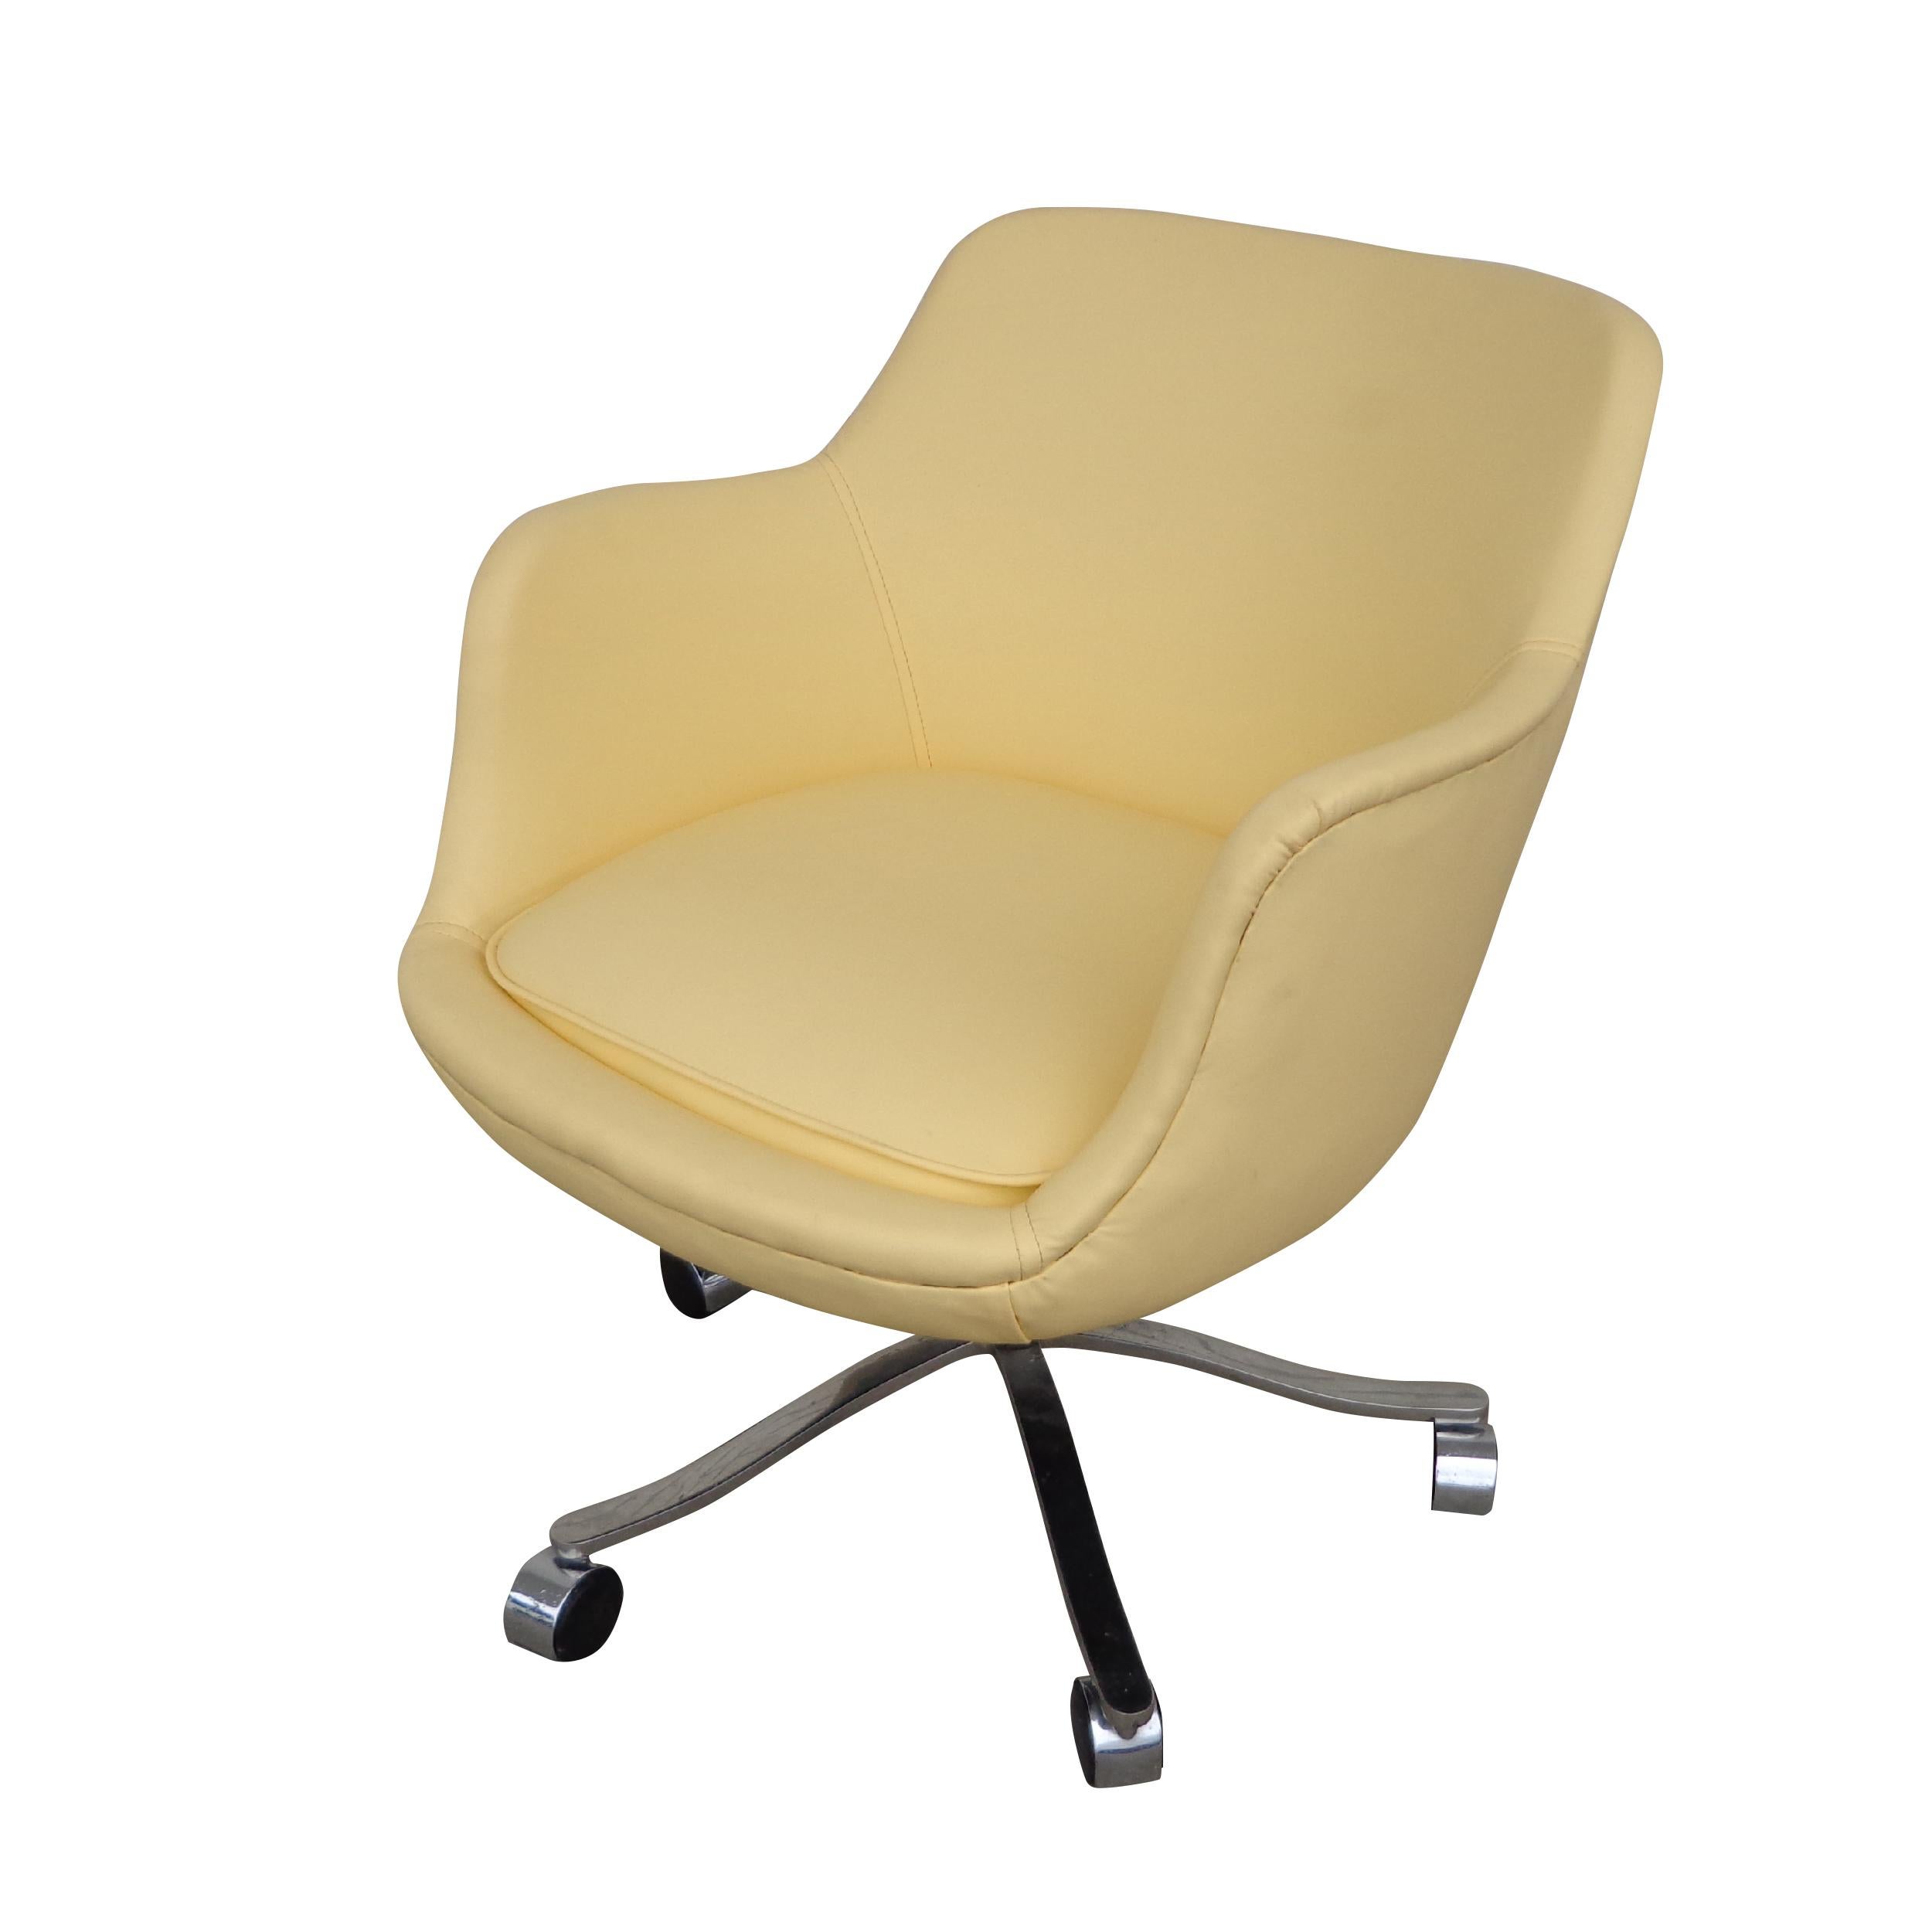 North American Vintage Zographos Alpha Bucket Chair Restored with New Vegan Ultra Leather For Sale